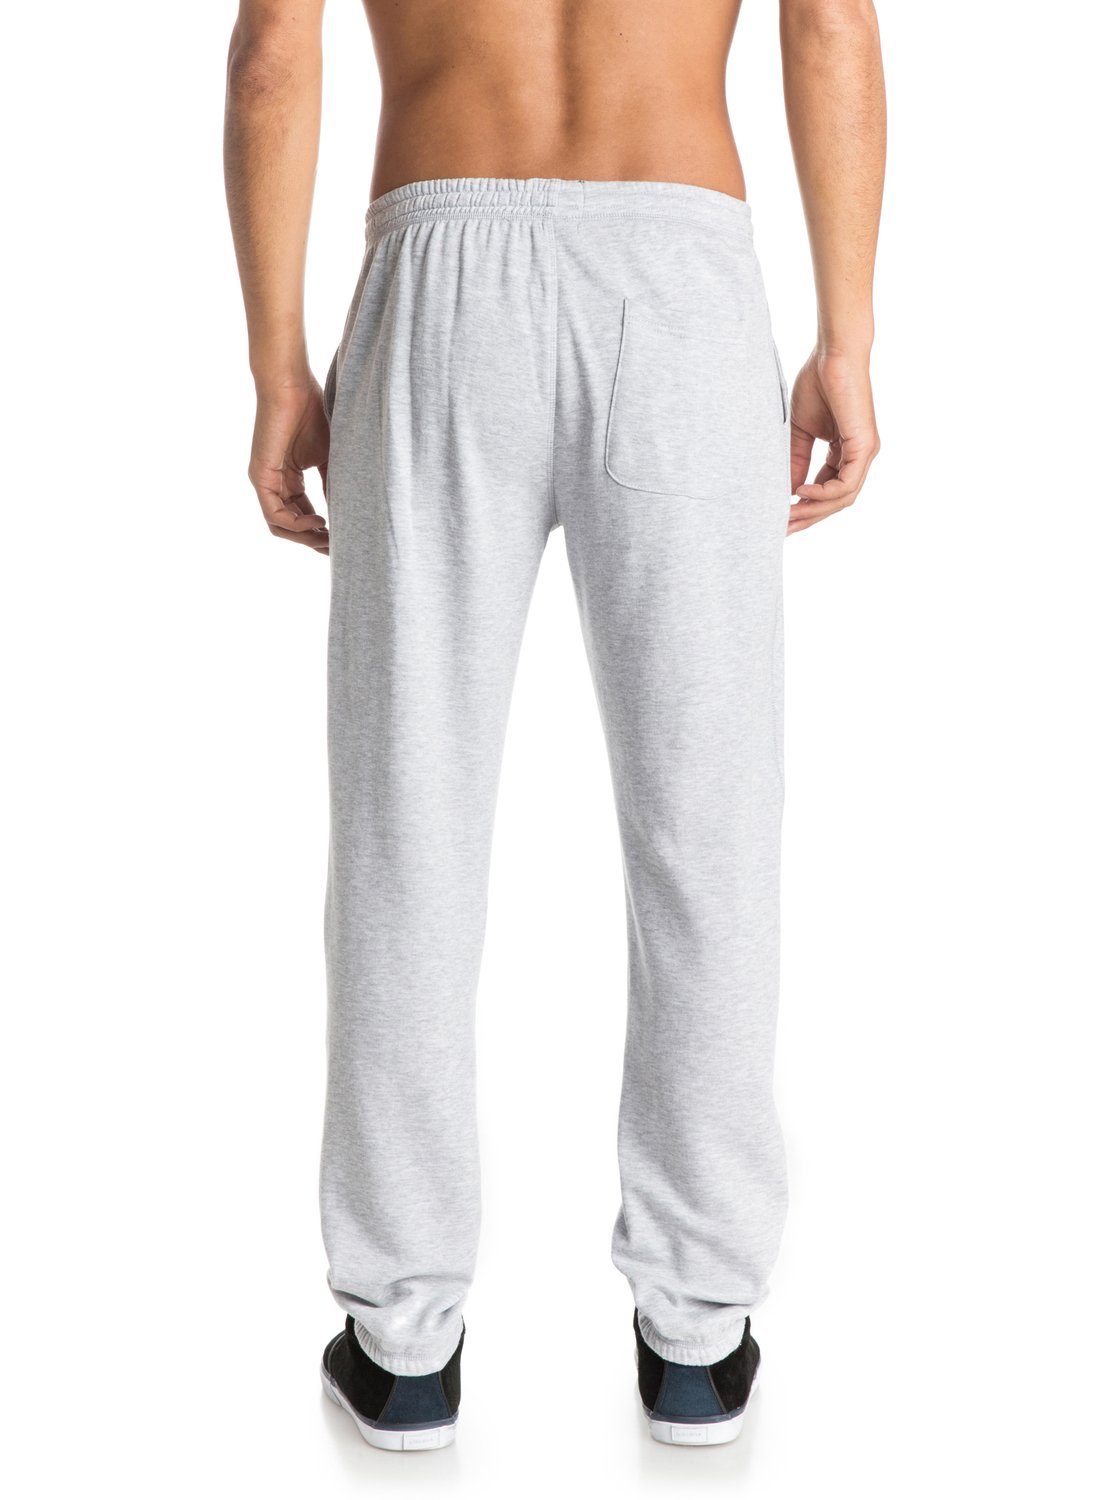 Everyday Heather Jogging Pants EQYFB03023 | Quiksilver